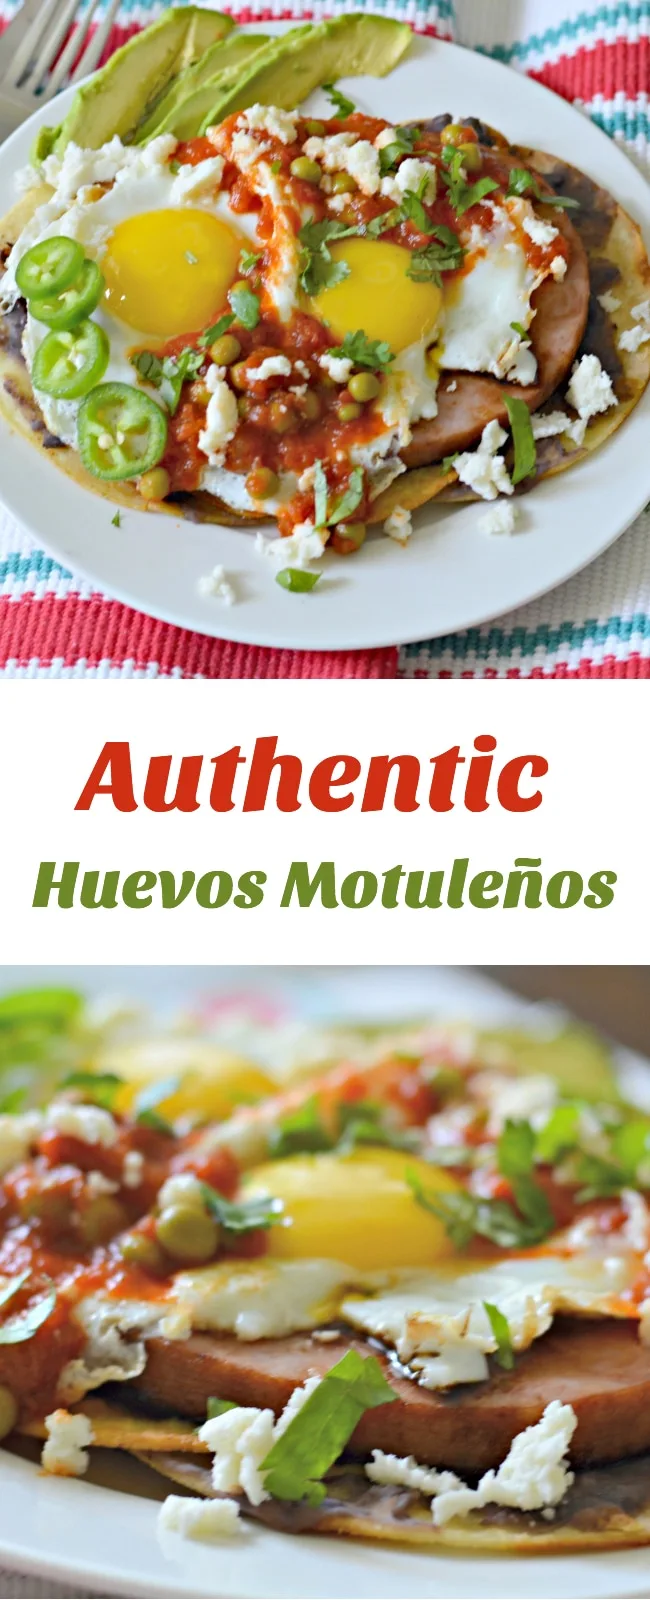 Huevos Motulenos is a traditional Mexican breakfast originating from Motul, Yucatan. It combines fried tortillas with beans, eggs, ham, and salsa roja for a hearty, delicious breakfast. AD 